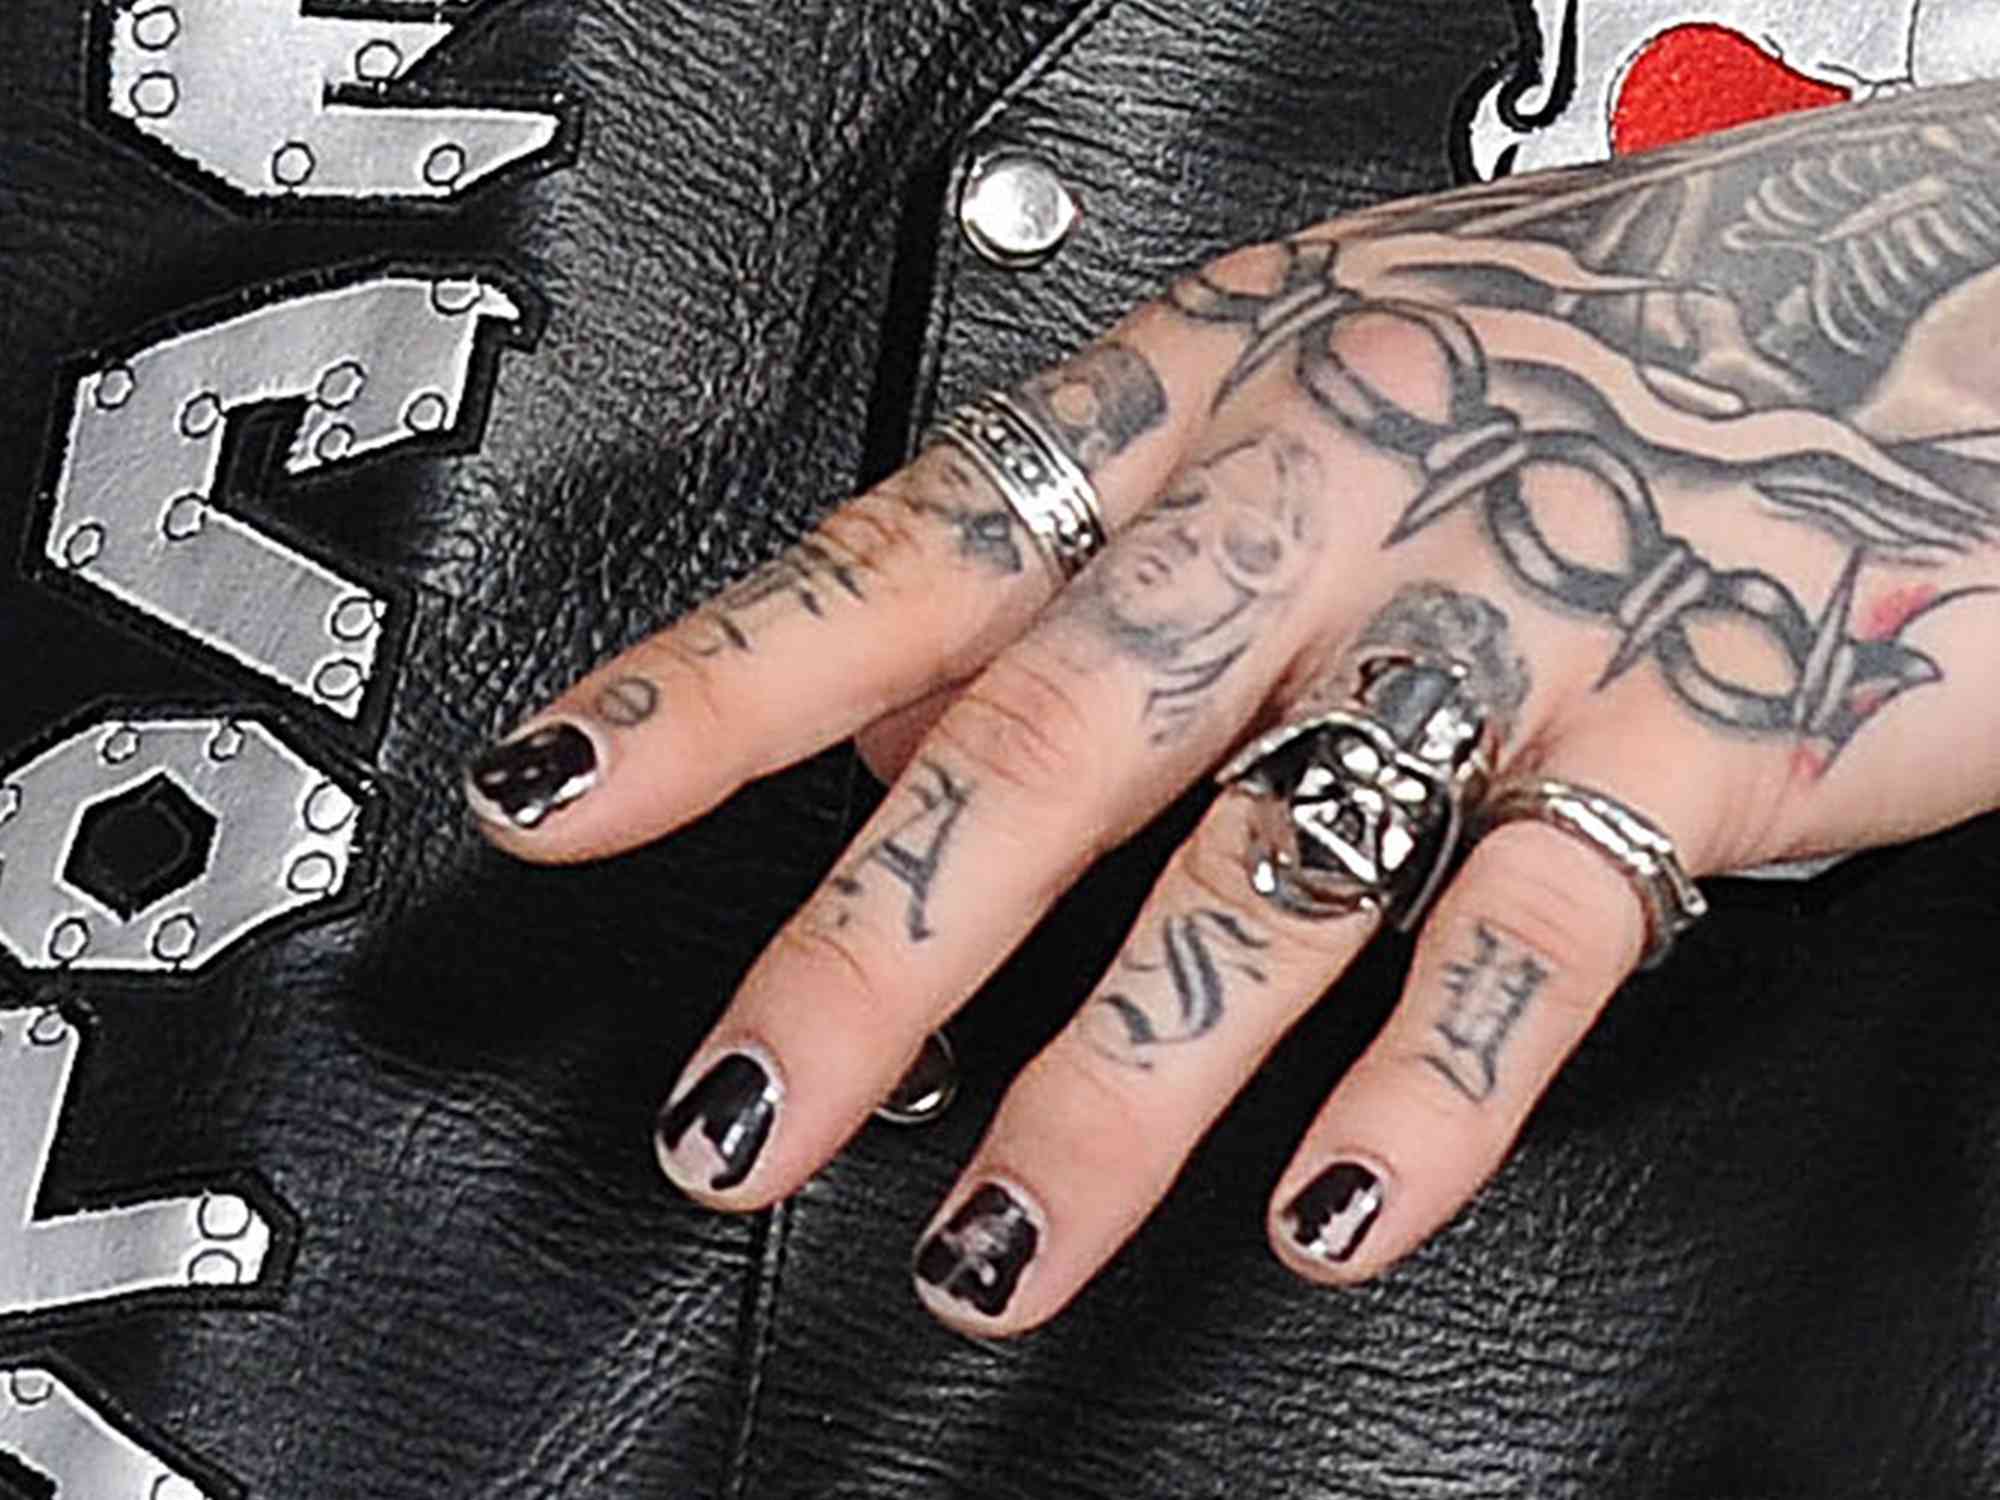 Post Malone attends the 2017 BET Awards at Microsoft Theater on June 25, 2017 in Los Angeles, California (tattoo detail)